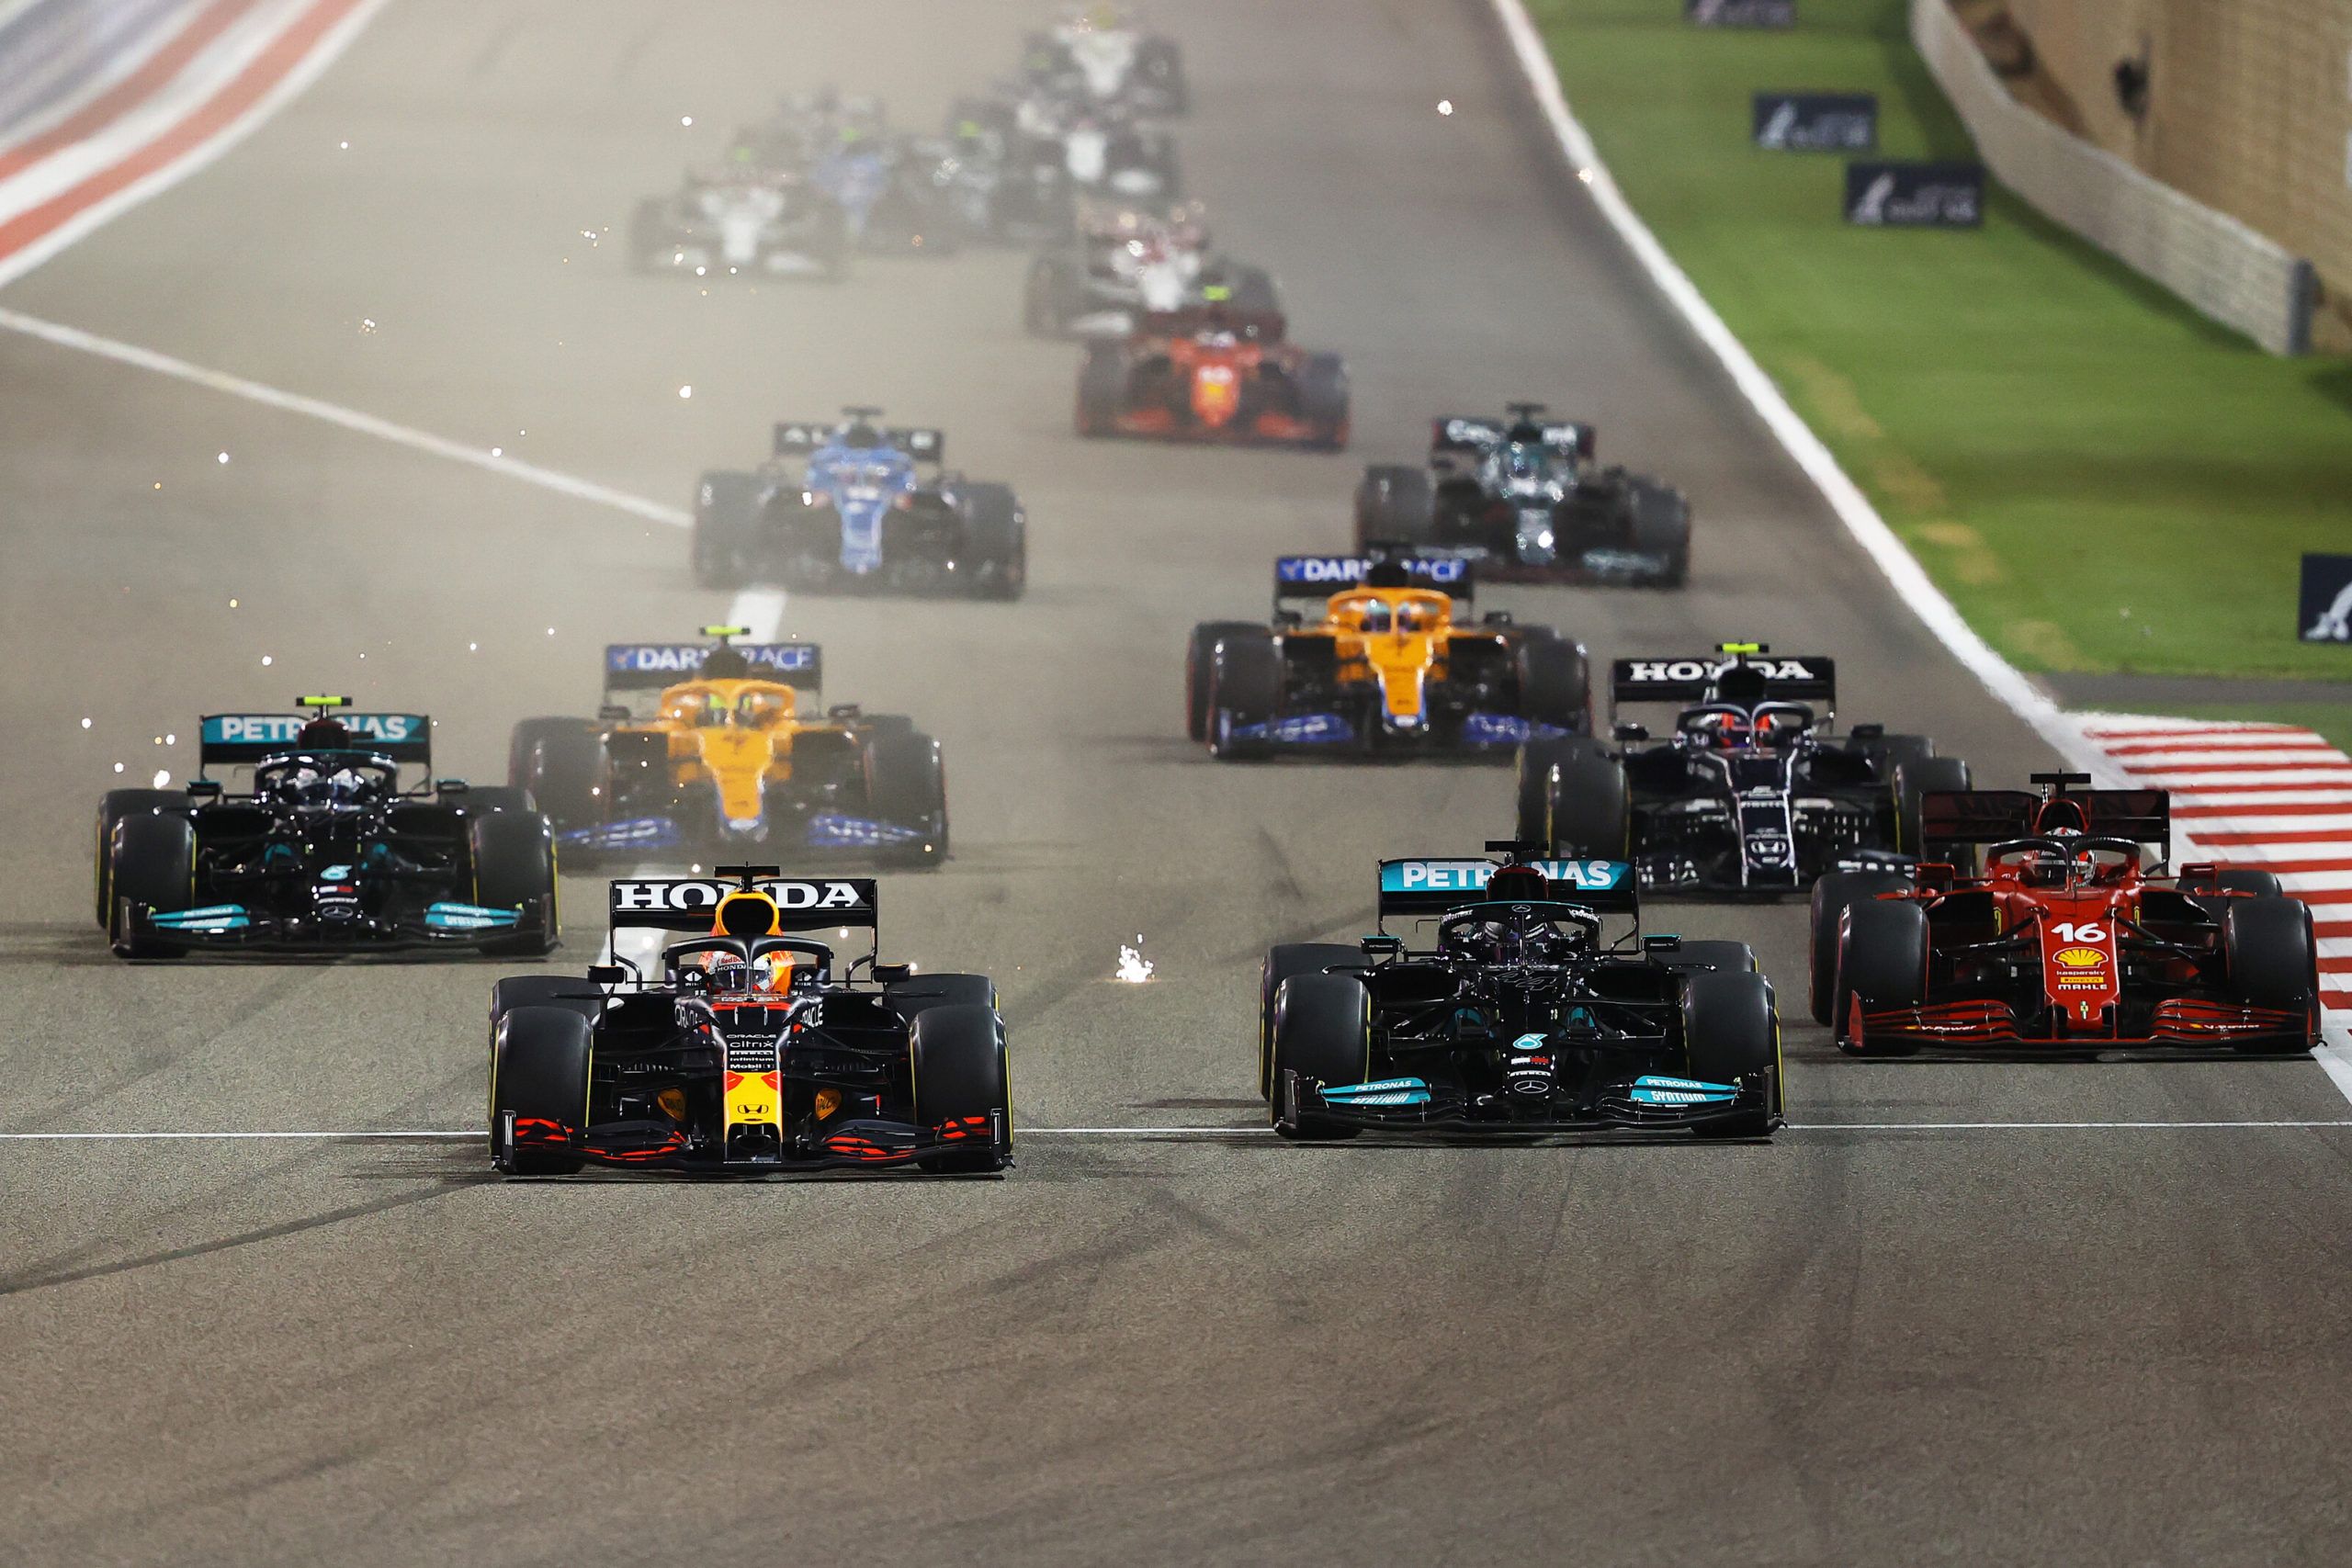 F1 Bahrain Full race results for the bahrain grand prix at the